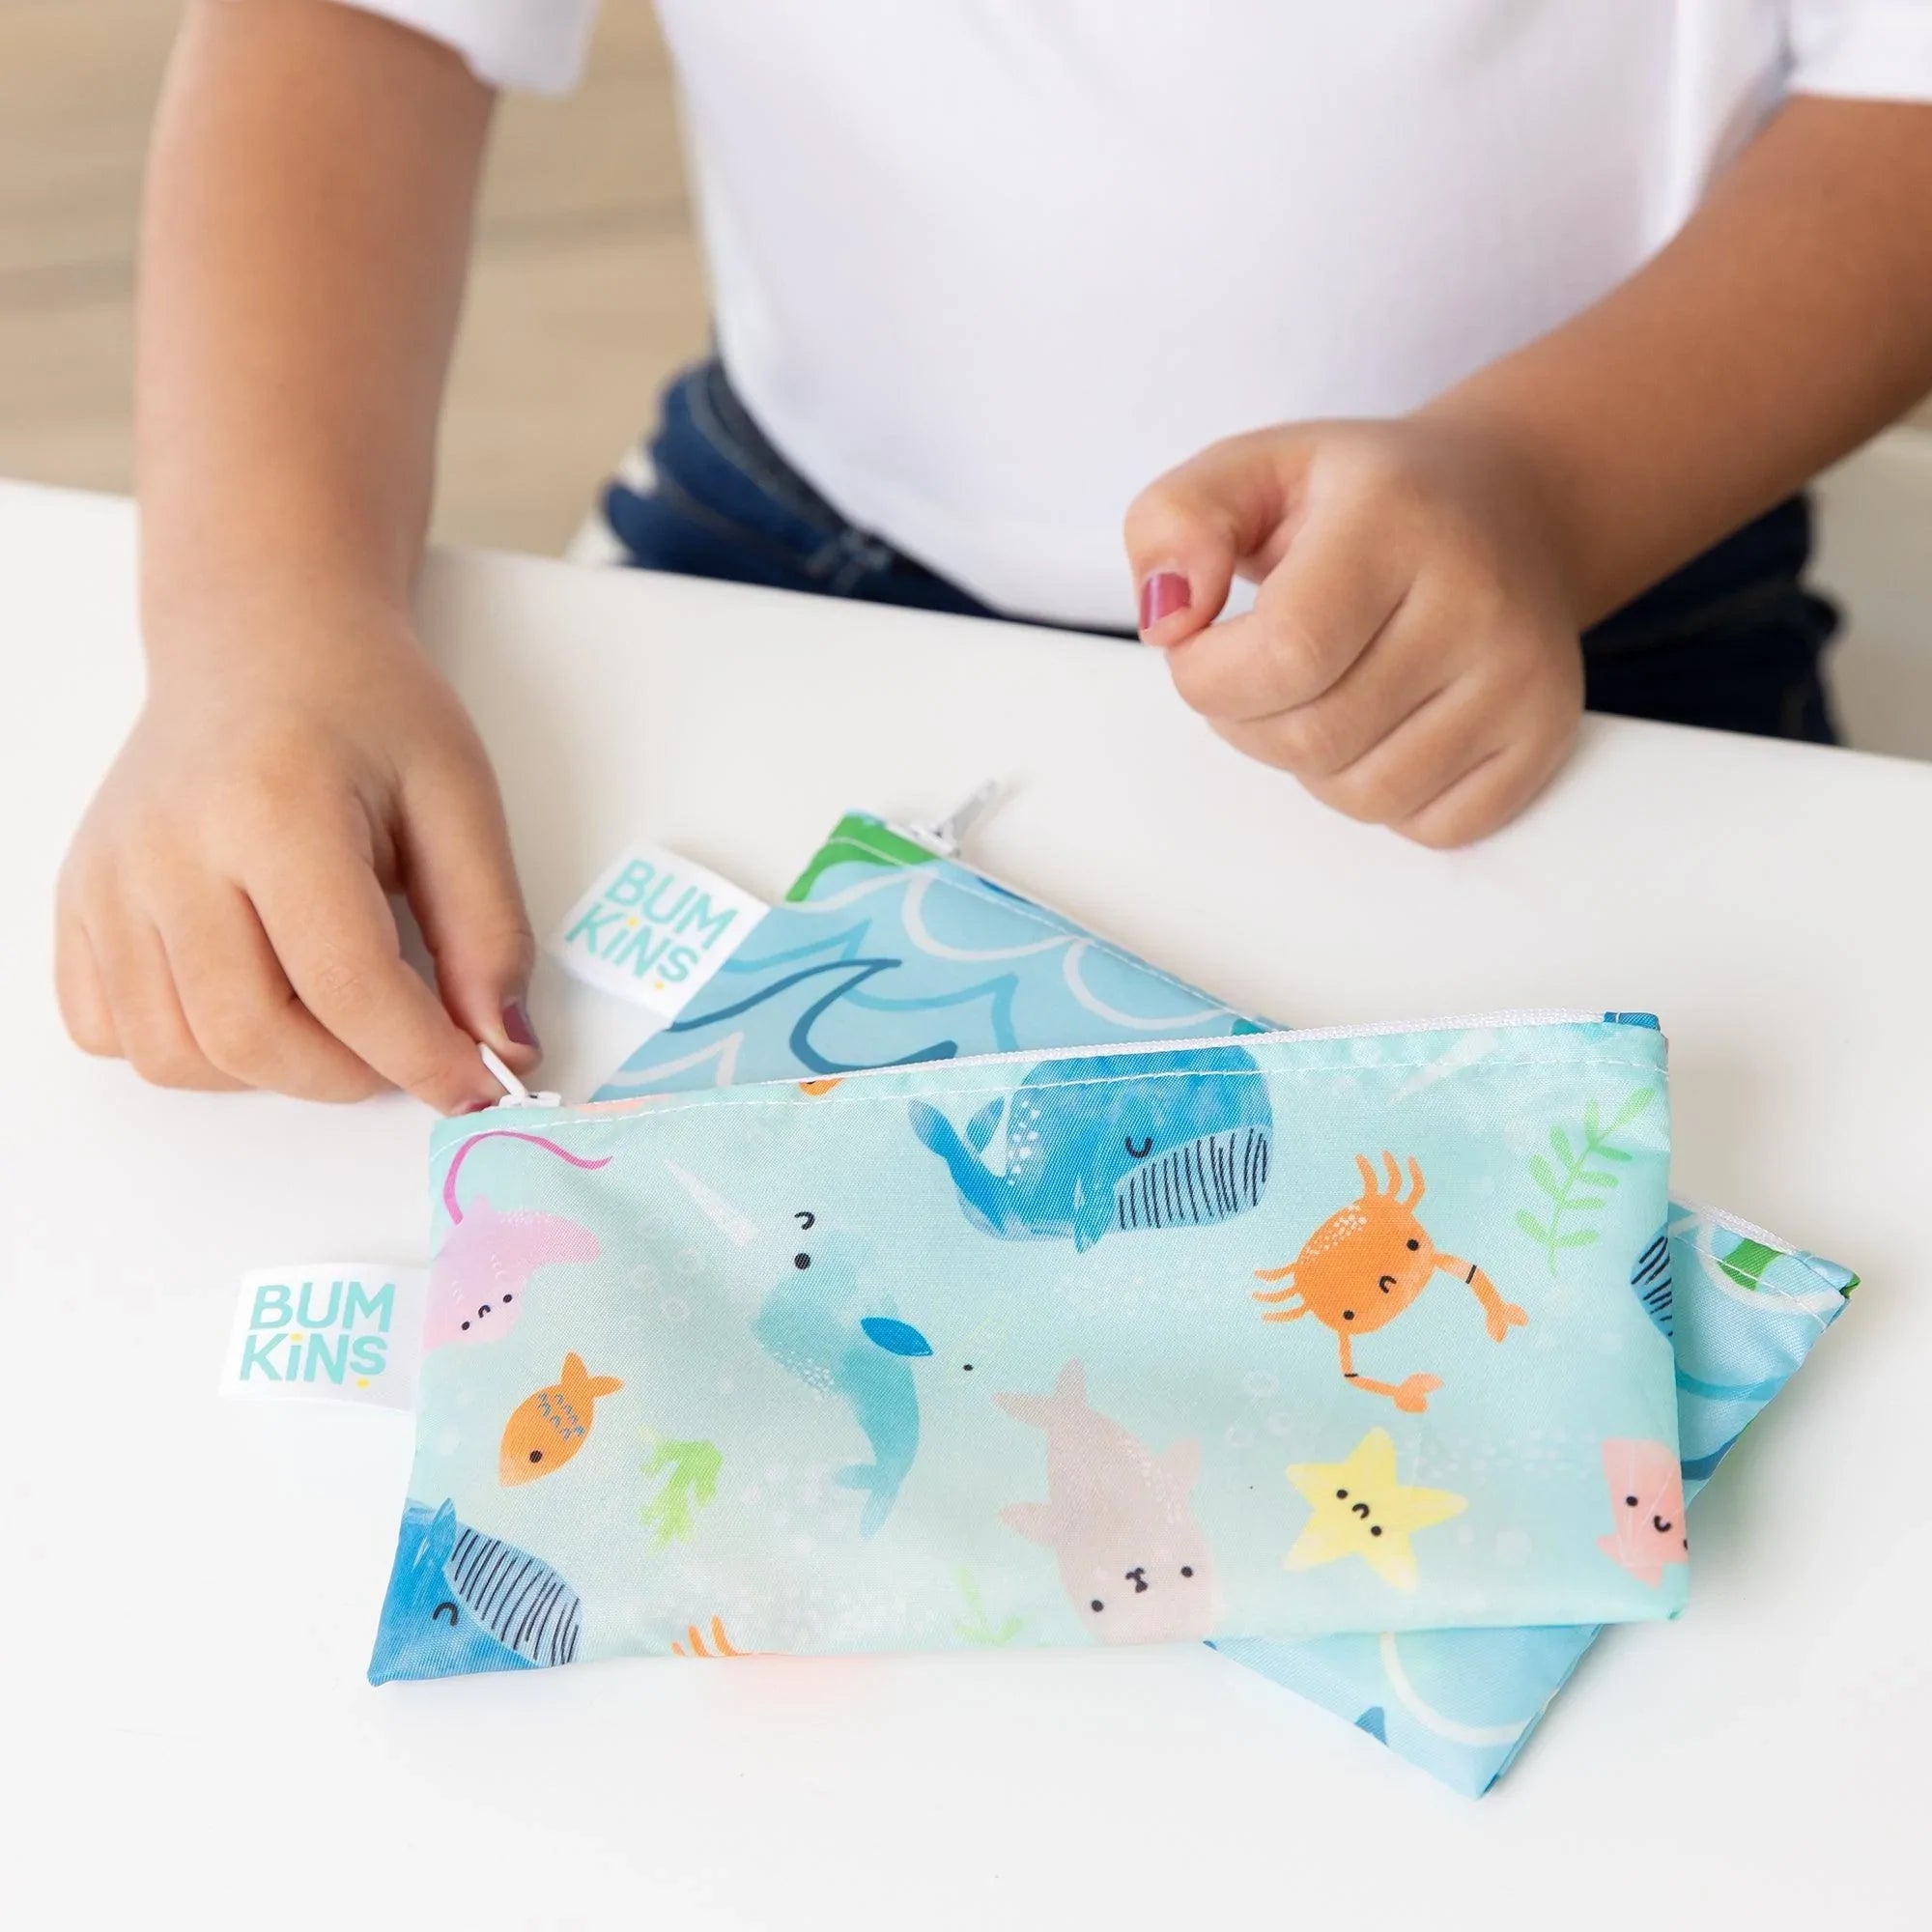 Reusable Snack Bag, Small 2-Pack: Ocean Life & Whale Tail - Bumkins